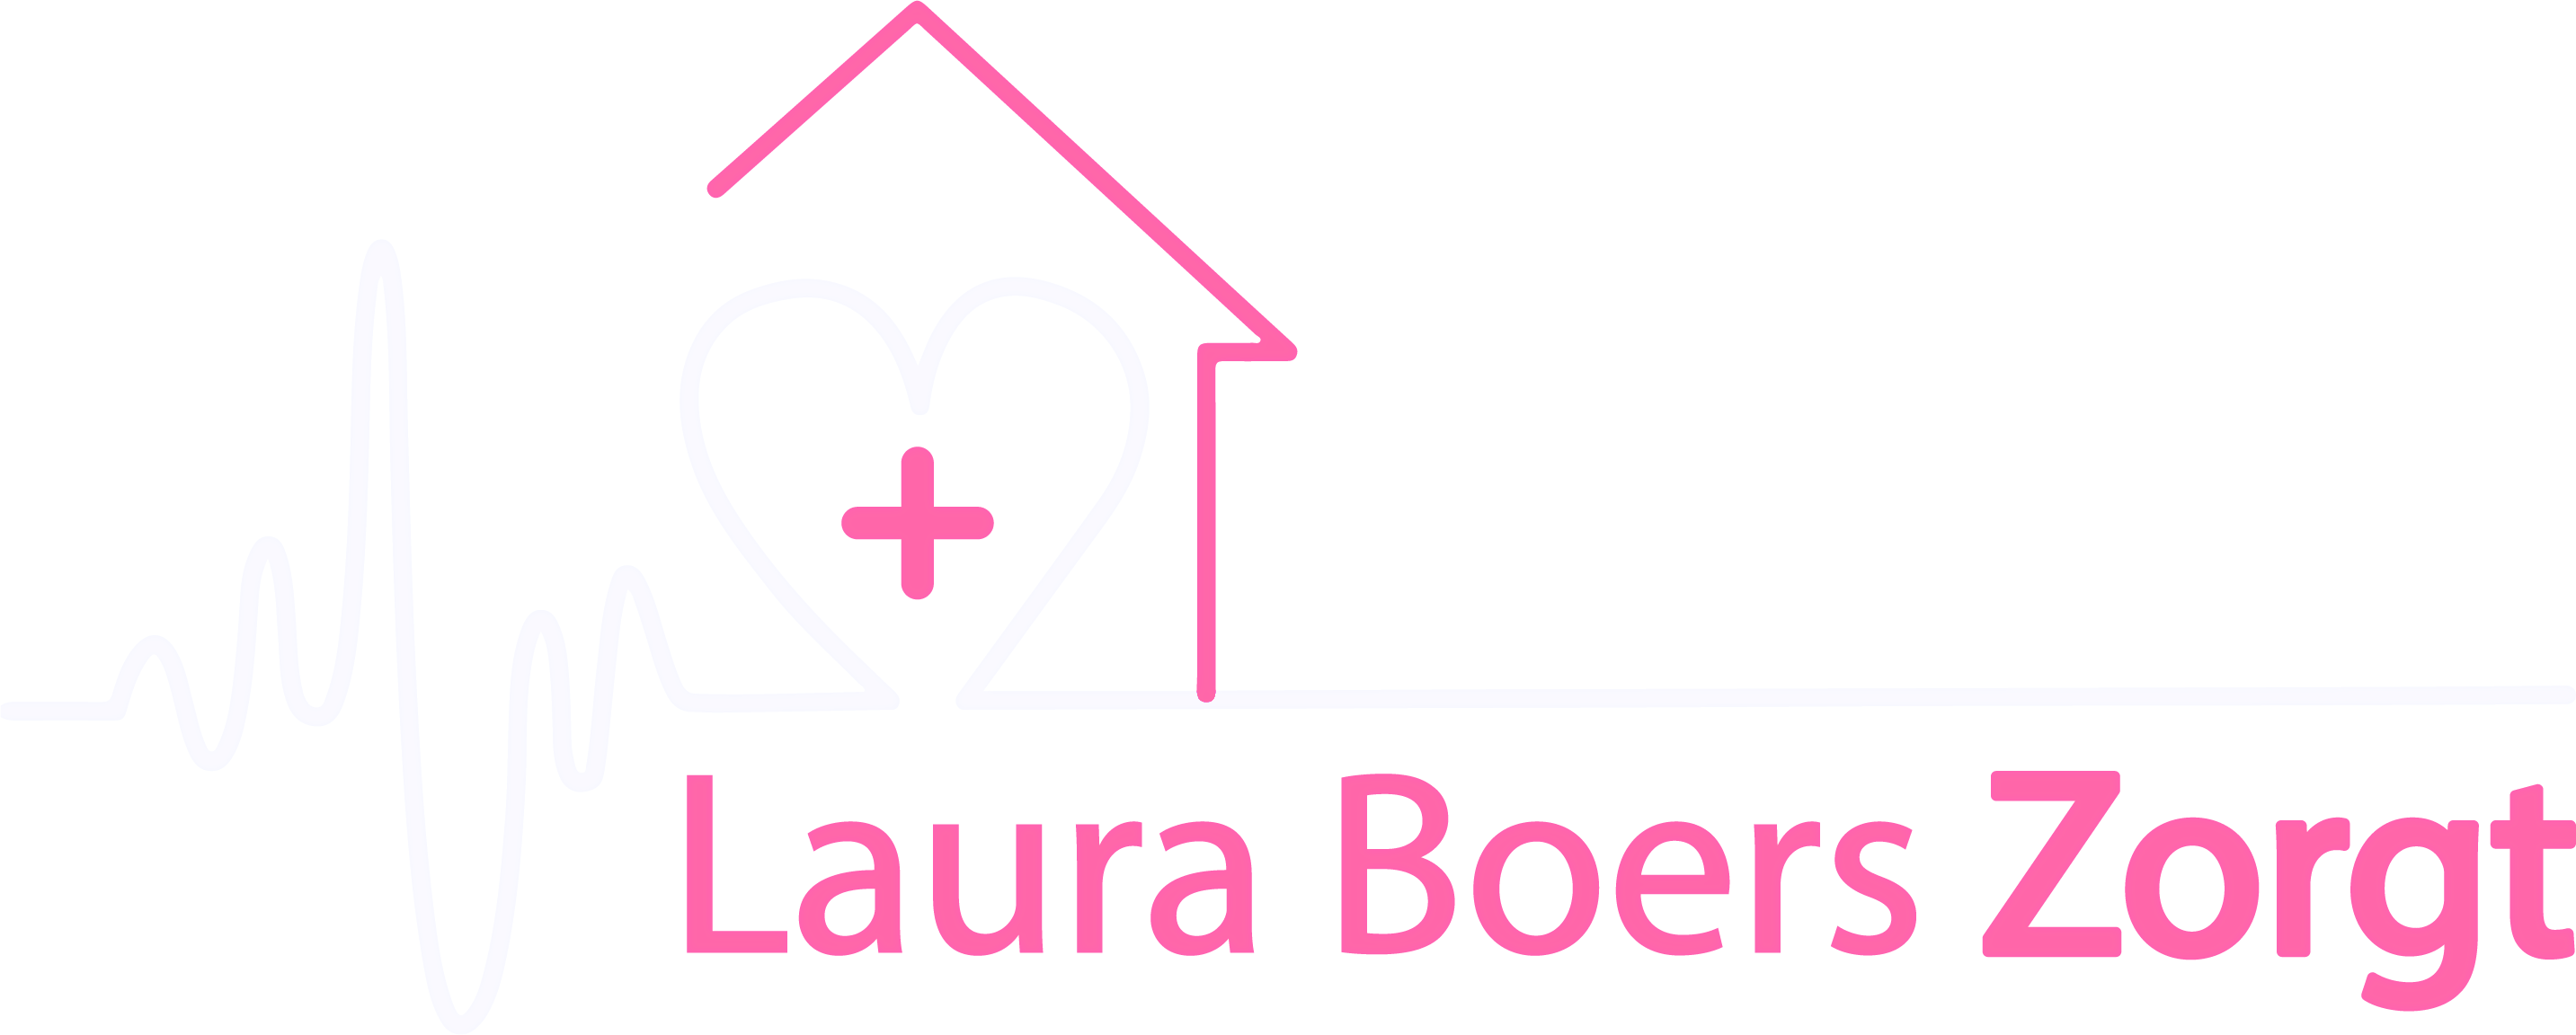 Laura Boers Zorgt